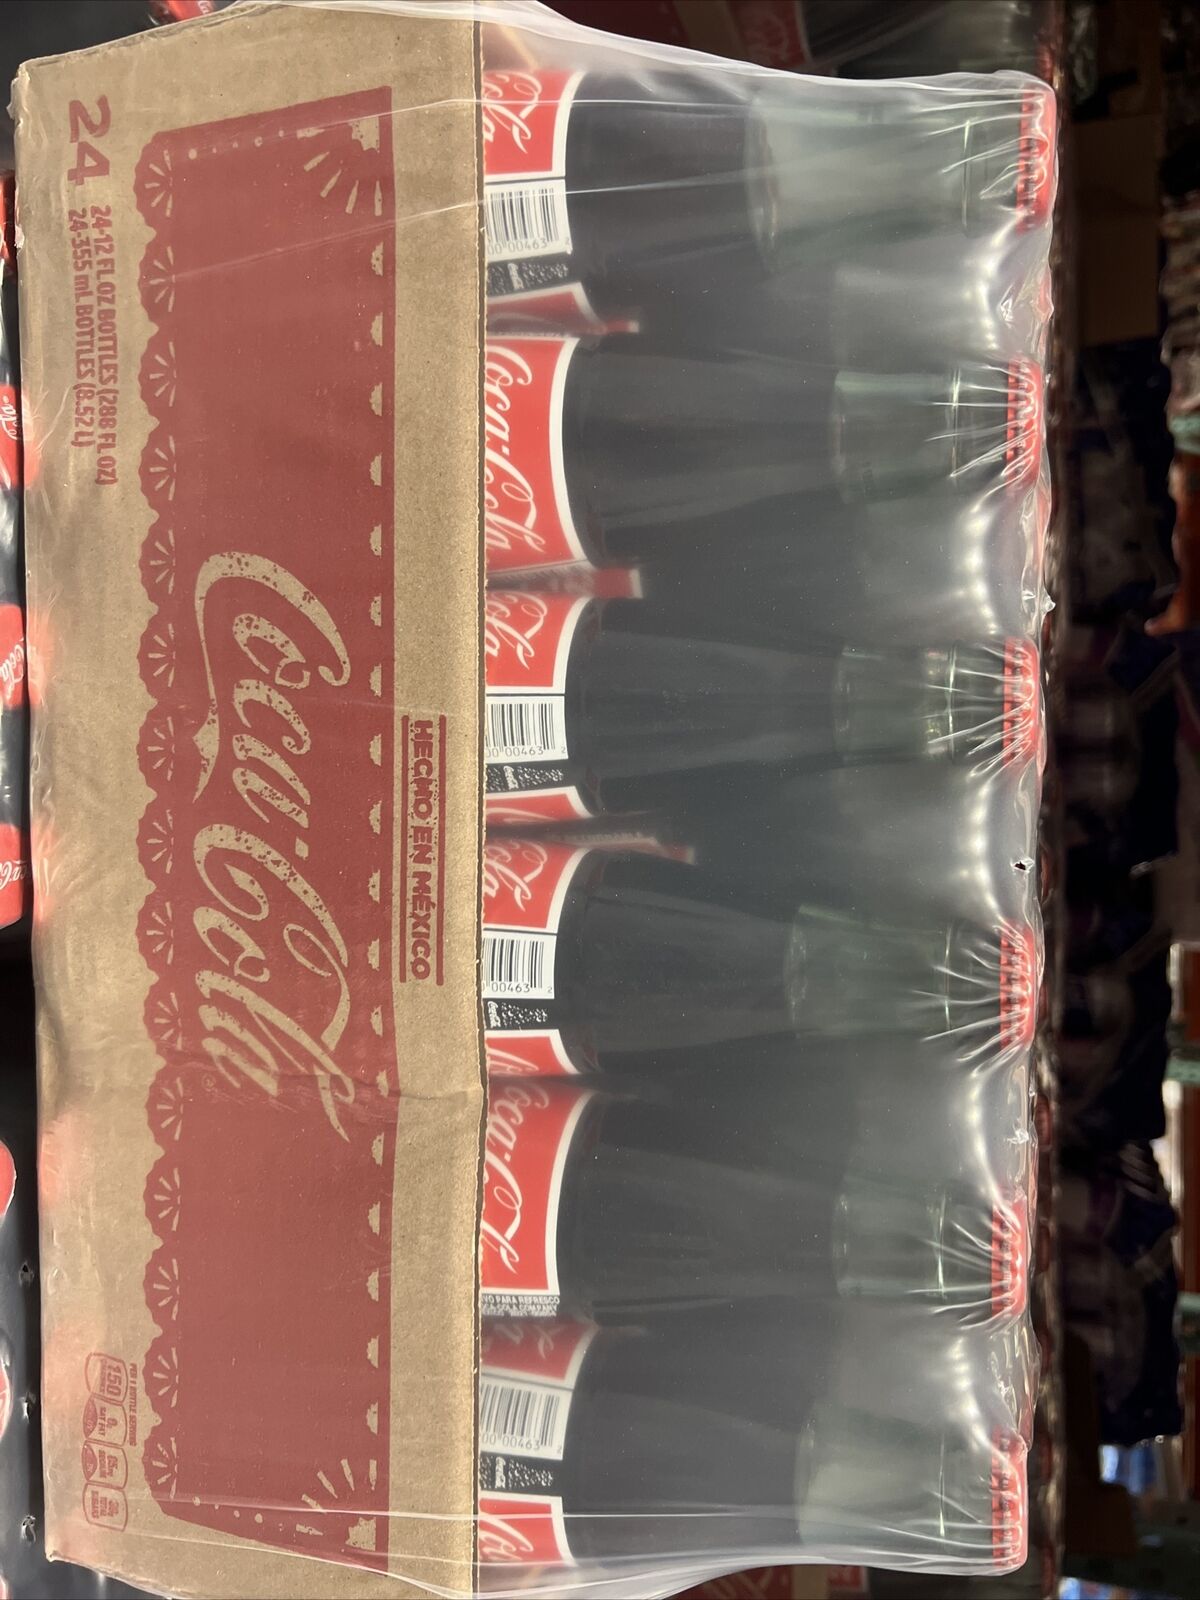 Mexican Coca-Cola Cane Sugar Import Glass Bottles 12oz Coke Hecho Mexico 24pack